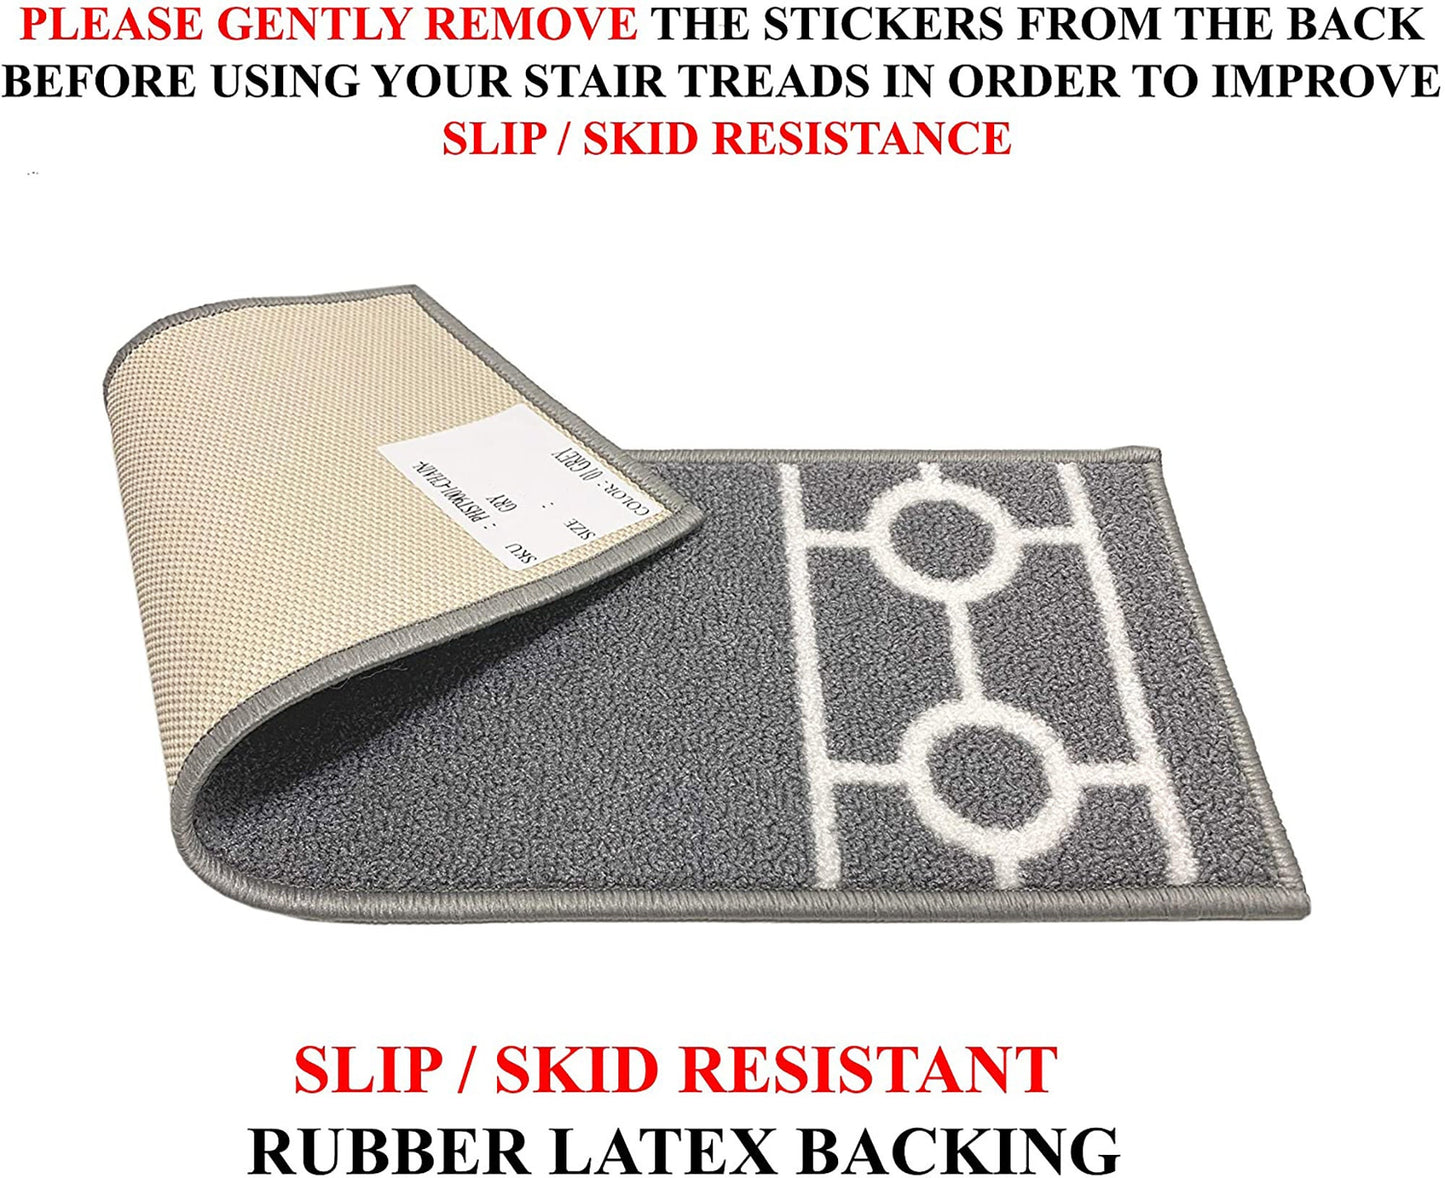 Machine Washable Stair Tread Chain Bordered Grey and White Skid Resistant Latex Back Carpet Stair Treads Size 8.5" x 26" Many Set Options